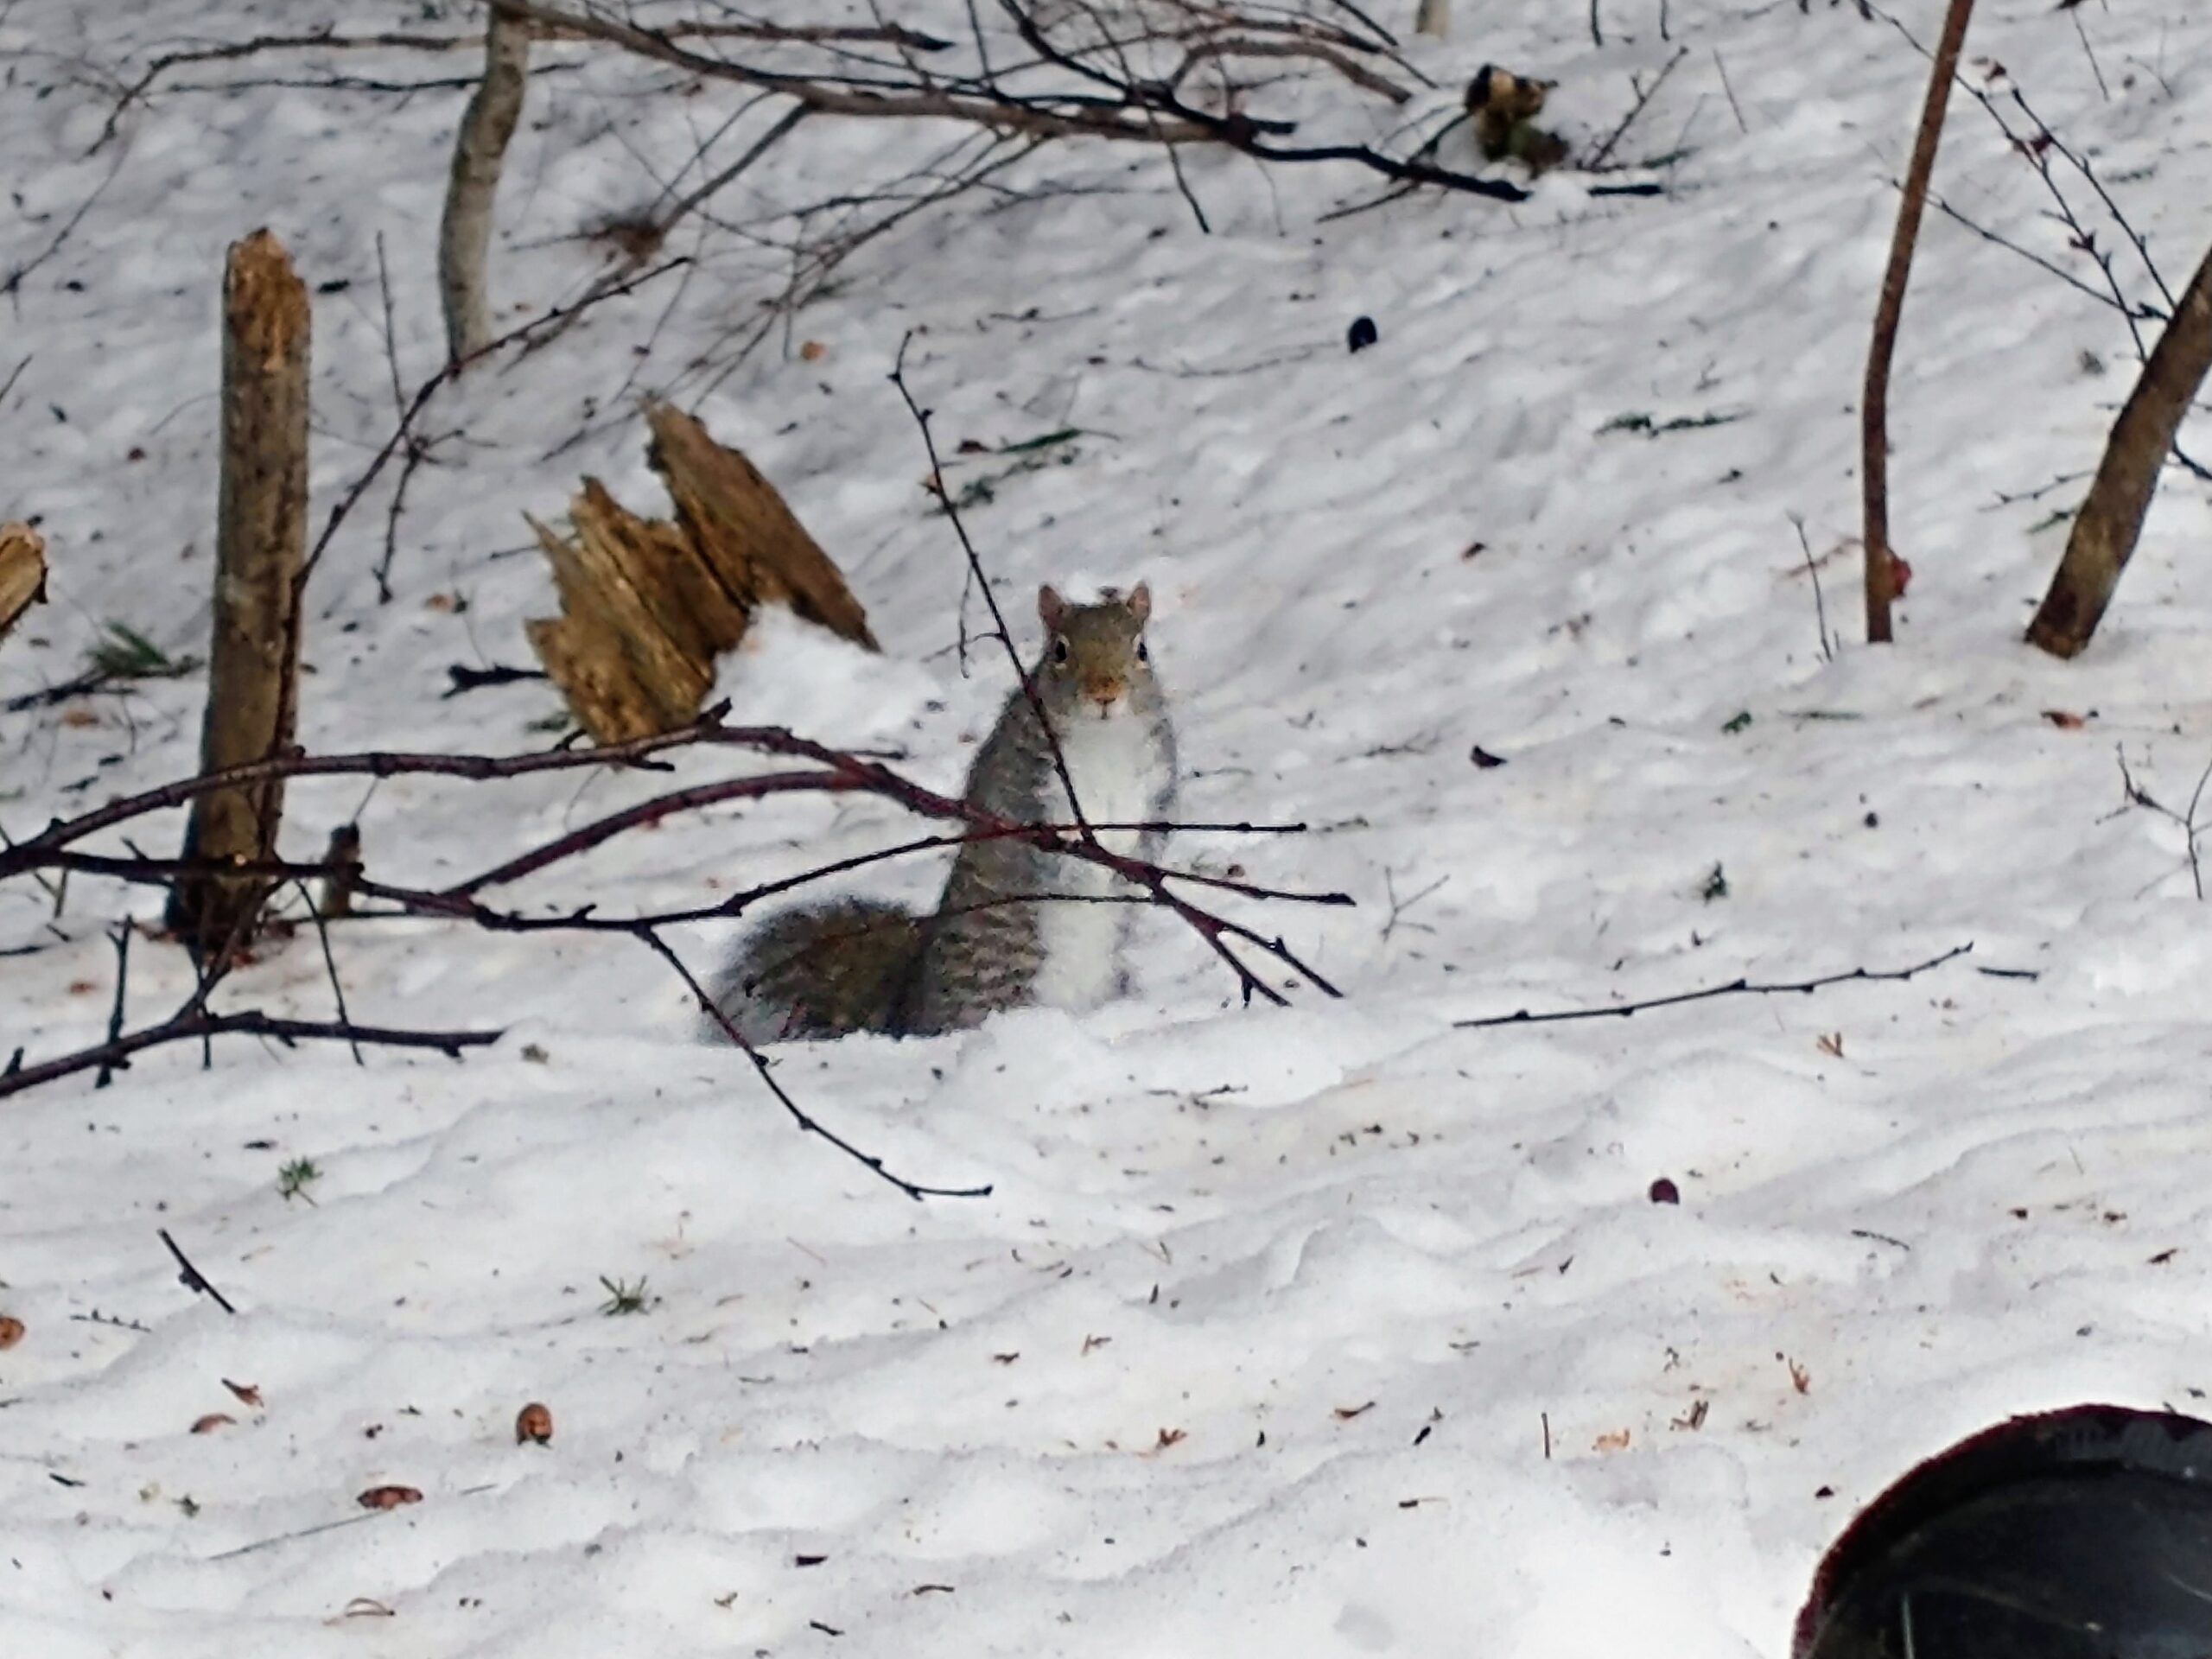 a grey squirrel sits on his haunches on snow covered ground behind a fallen branch